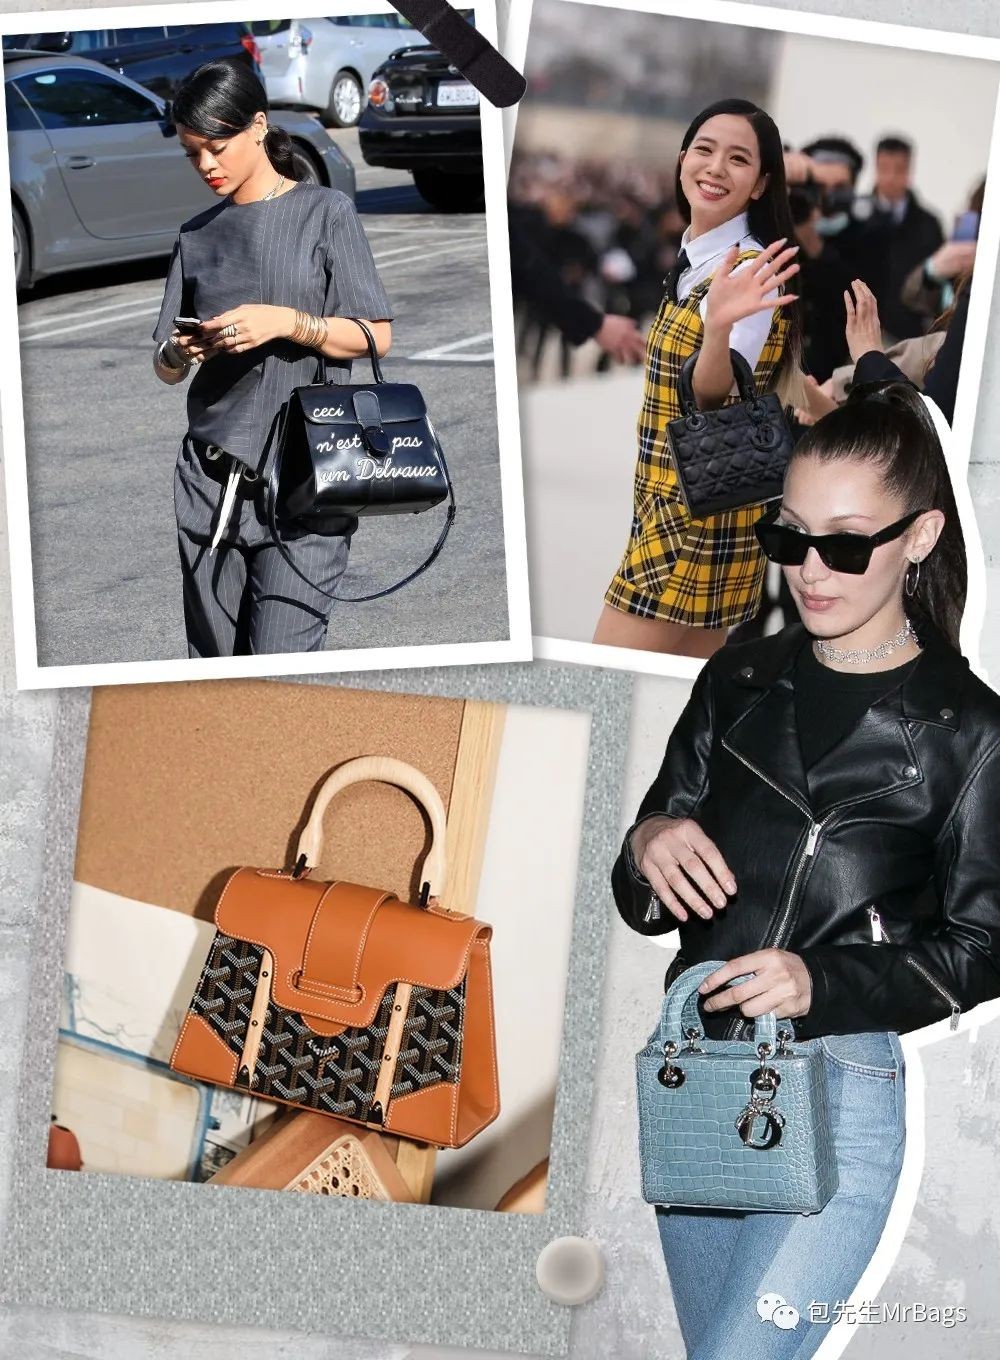 Chanel bags are too expensive, what should I do? (2023 updated)-Best Quality Fake Louis Vuitton Bag Online Store ، حقيبة مصمم طبق الأصل ru